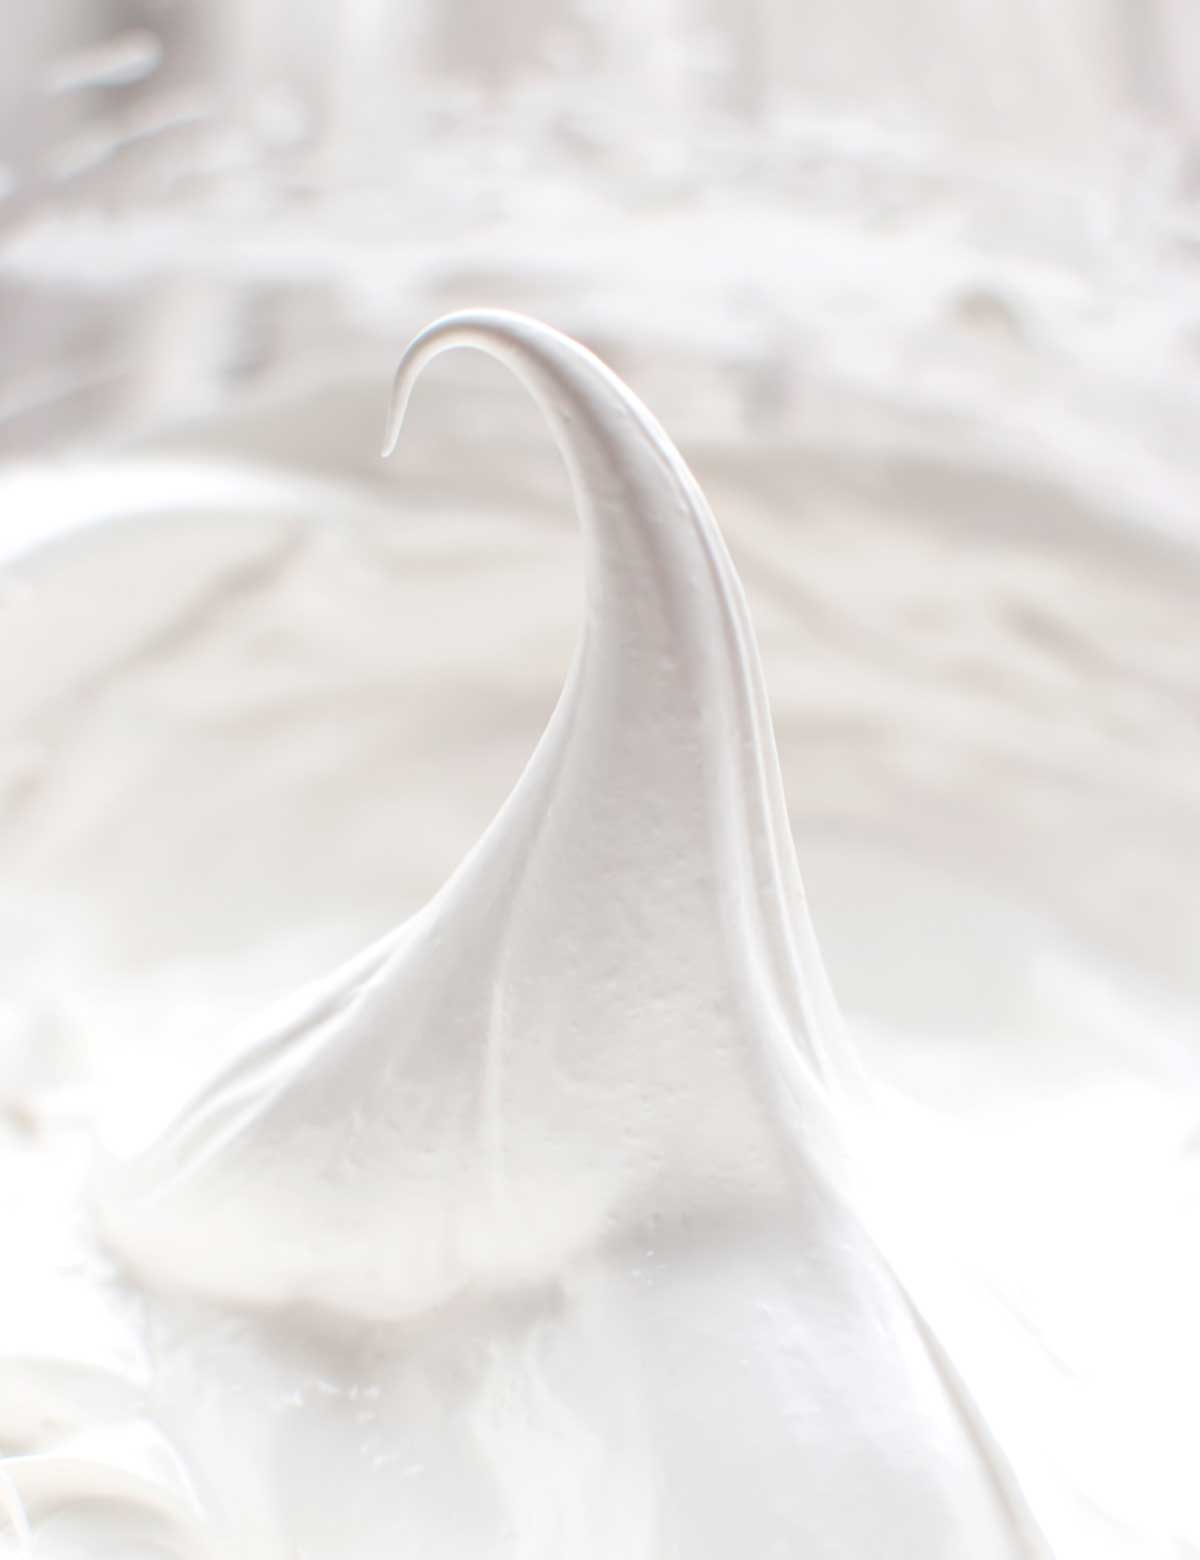 Whipped meringue, as illustration of the difference between French, Italian, and Swiss meringues.